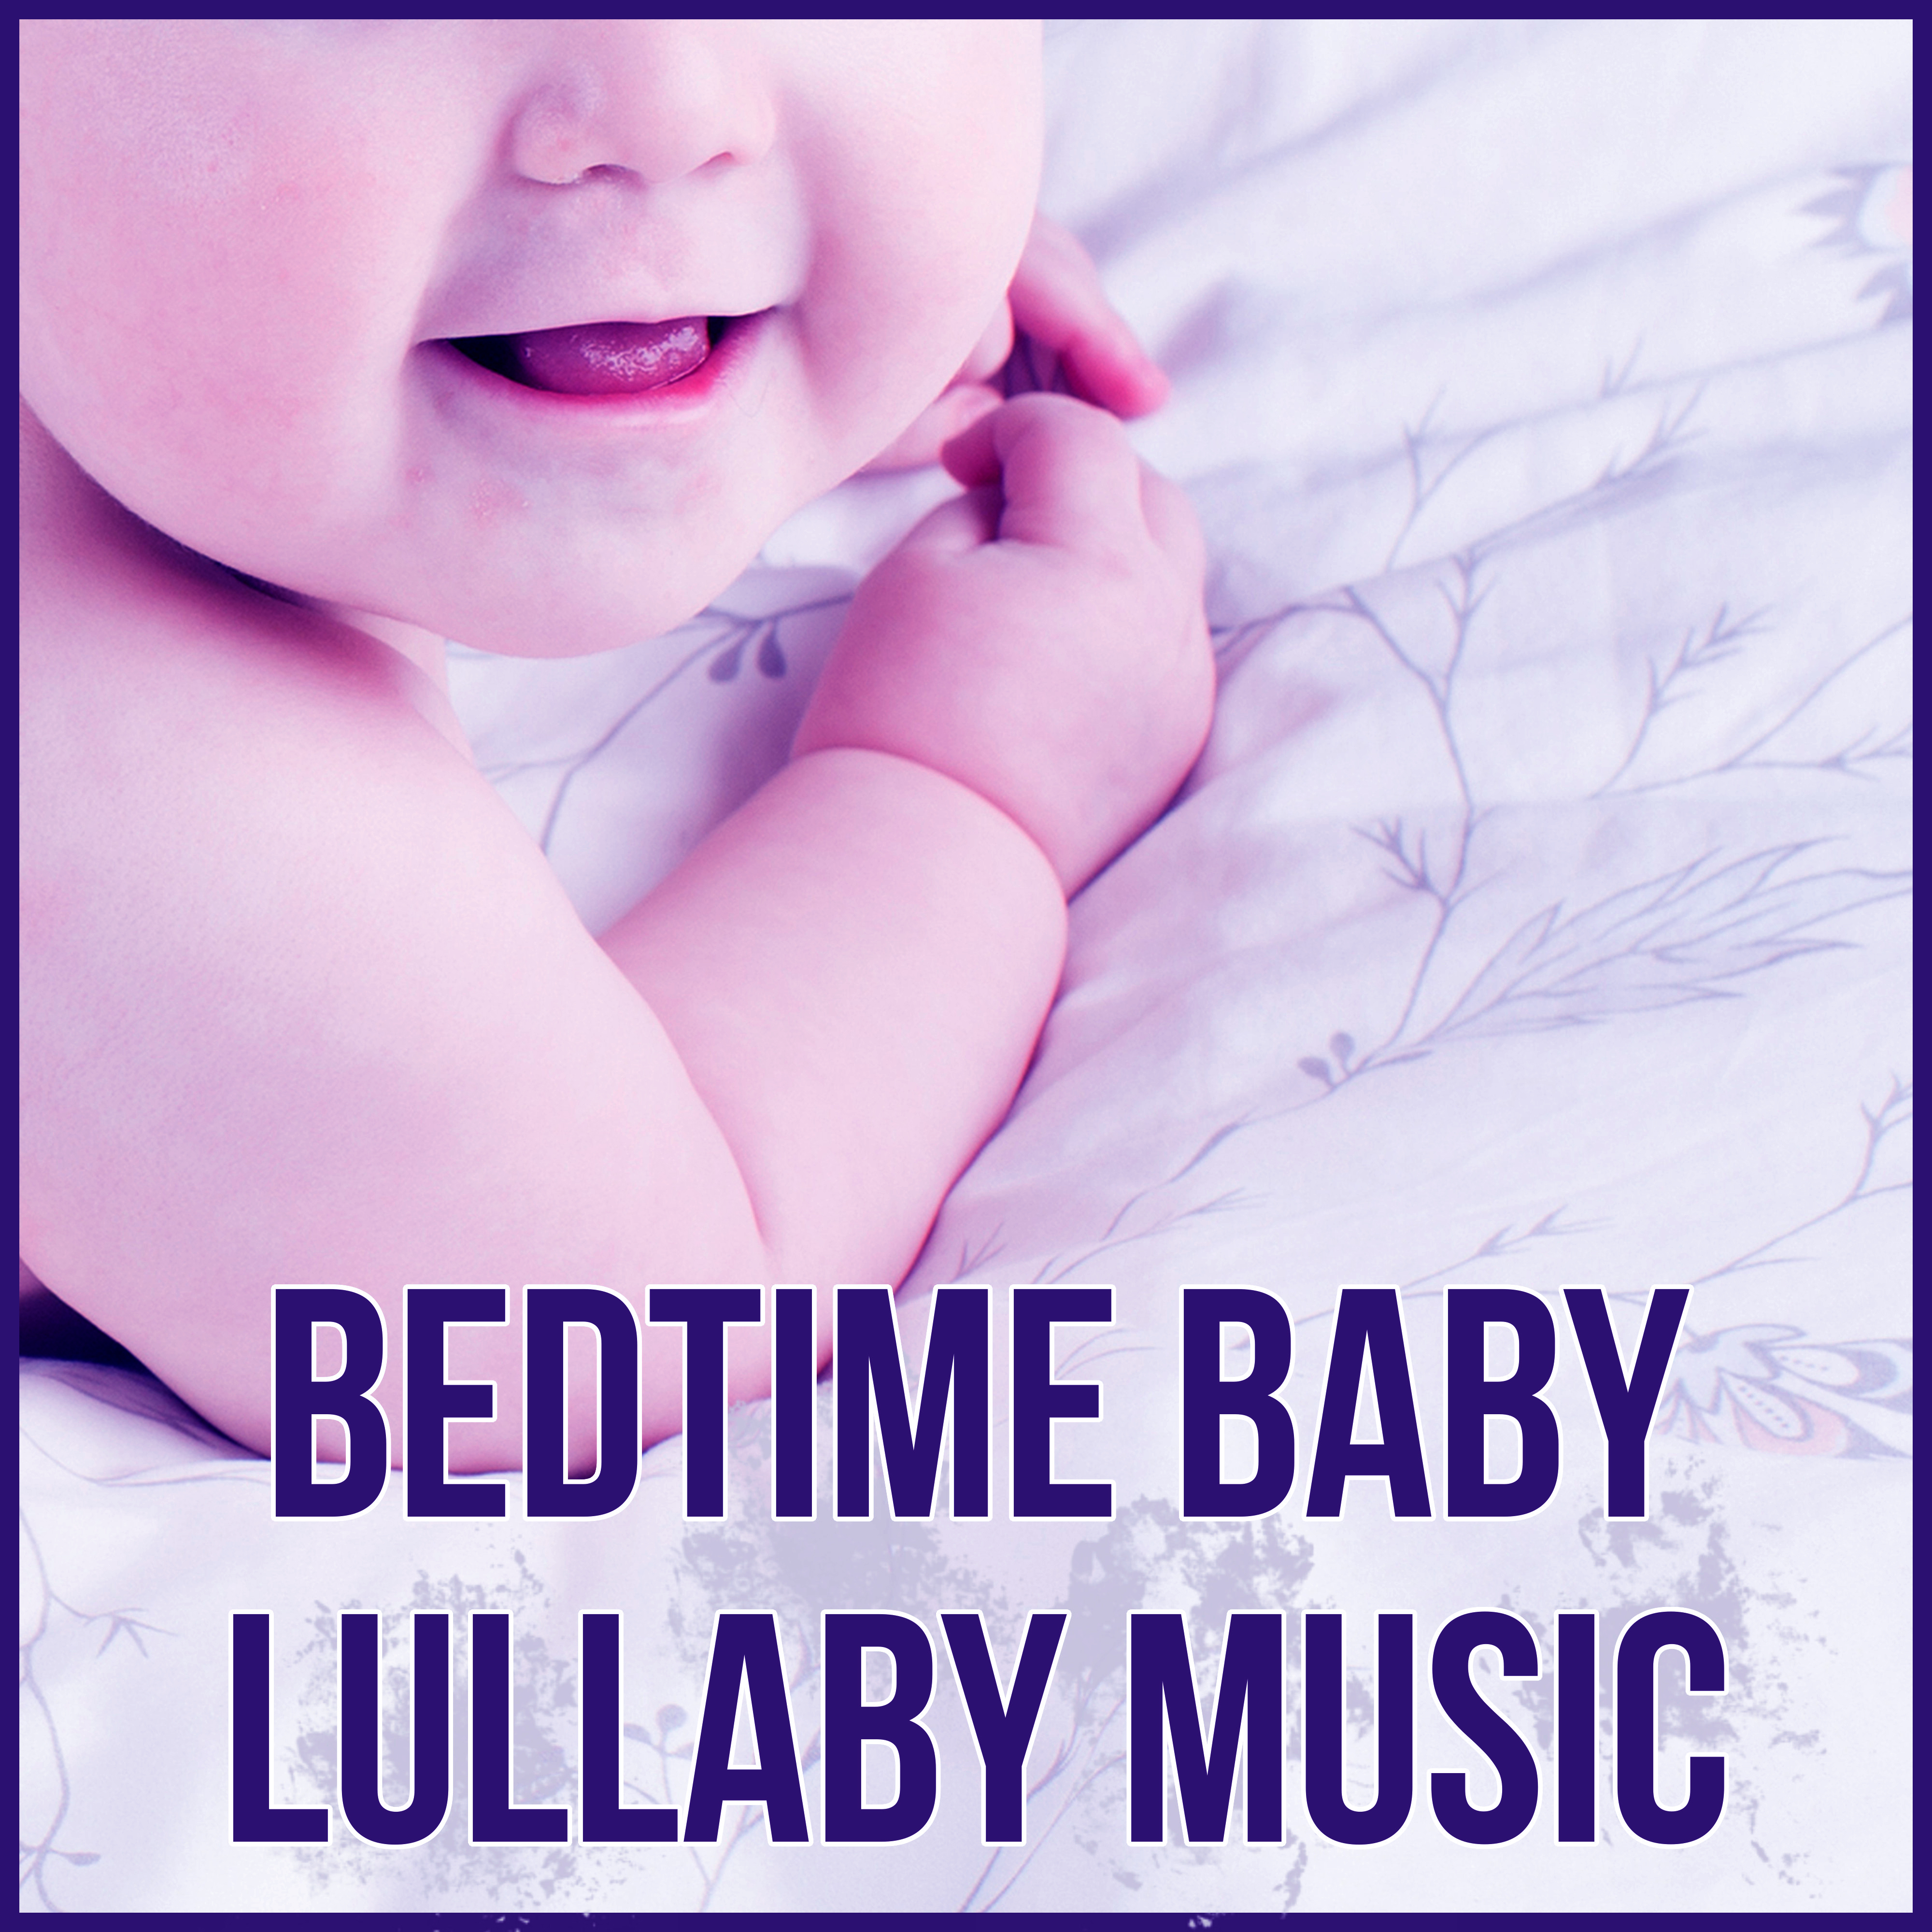 Bedtime Baby Lullaby Music - Soothing Sounds for Relaxation, White Noise to Fall Asleep